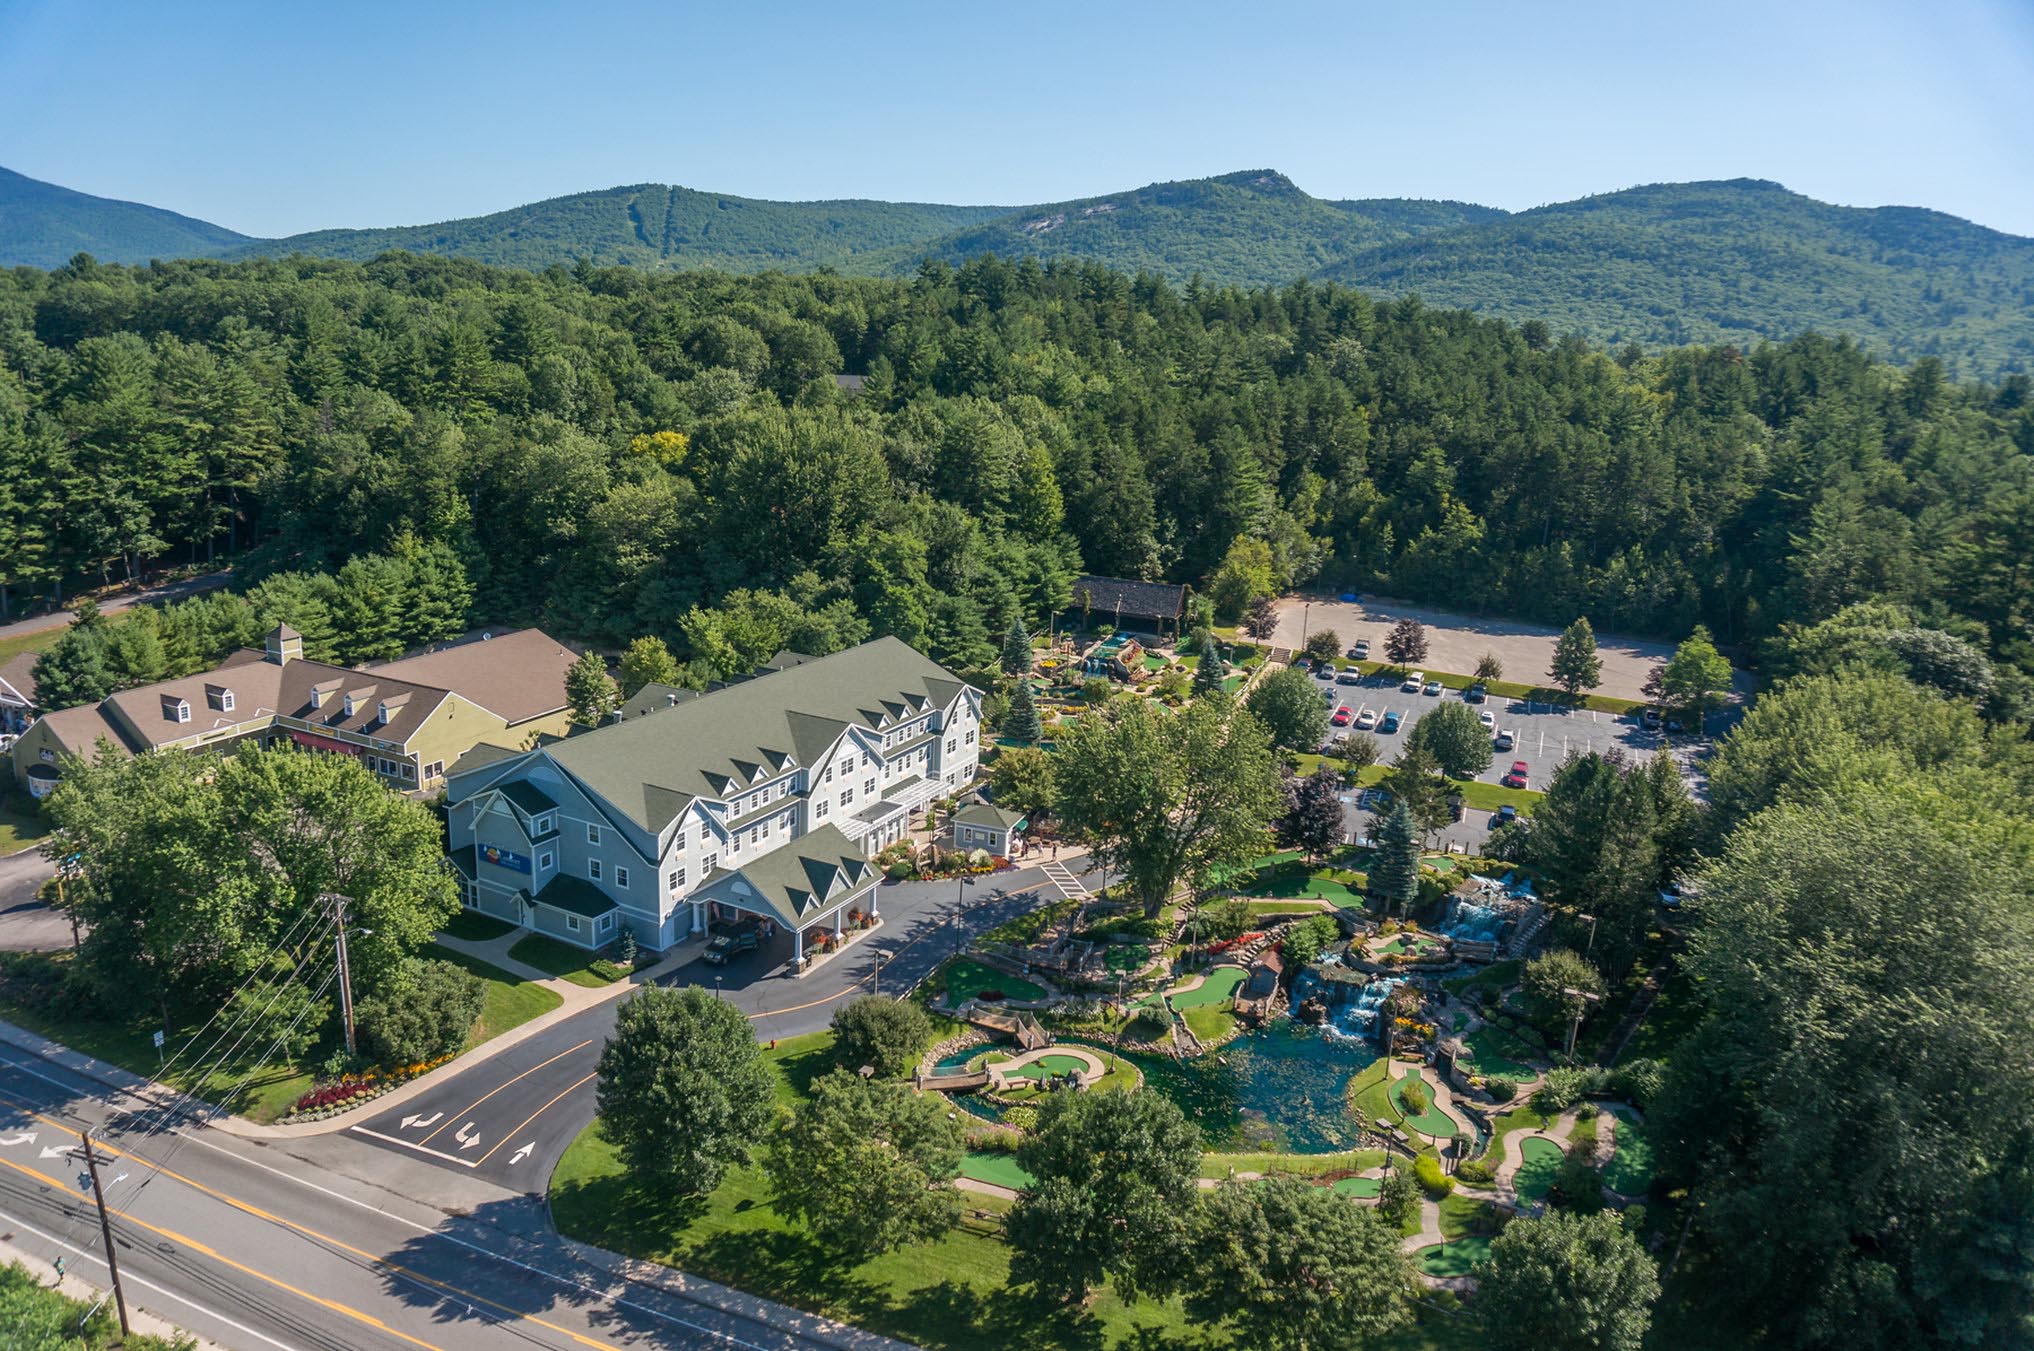 Birds-eye view of Comfort Inn & Suites North Conway